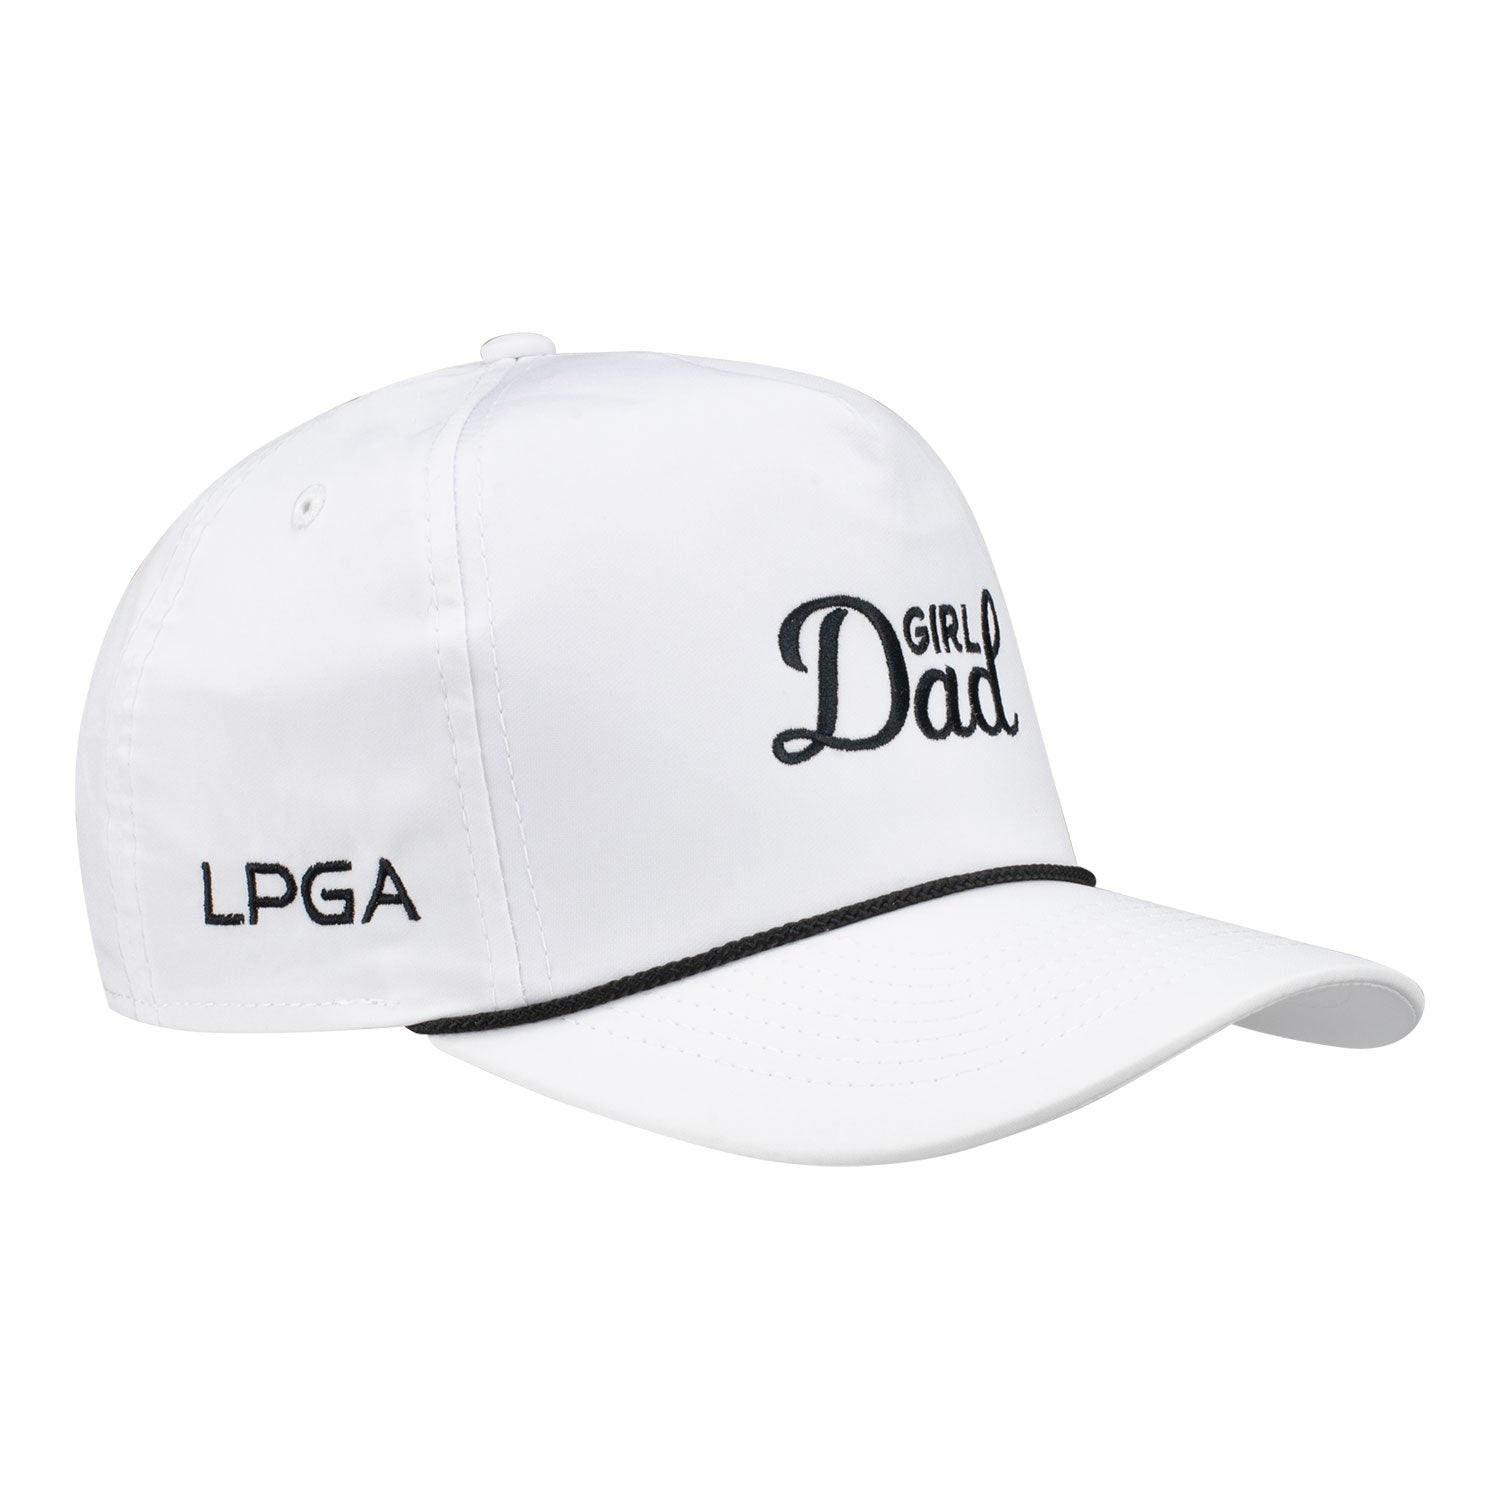 Barstool Golf LPGA Girl Dad Hat in White - Angled Right Side View